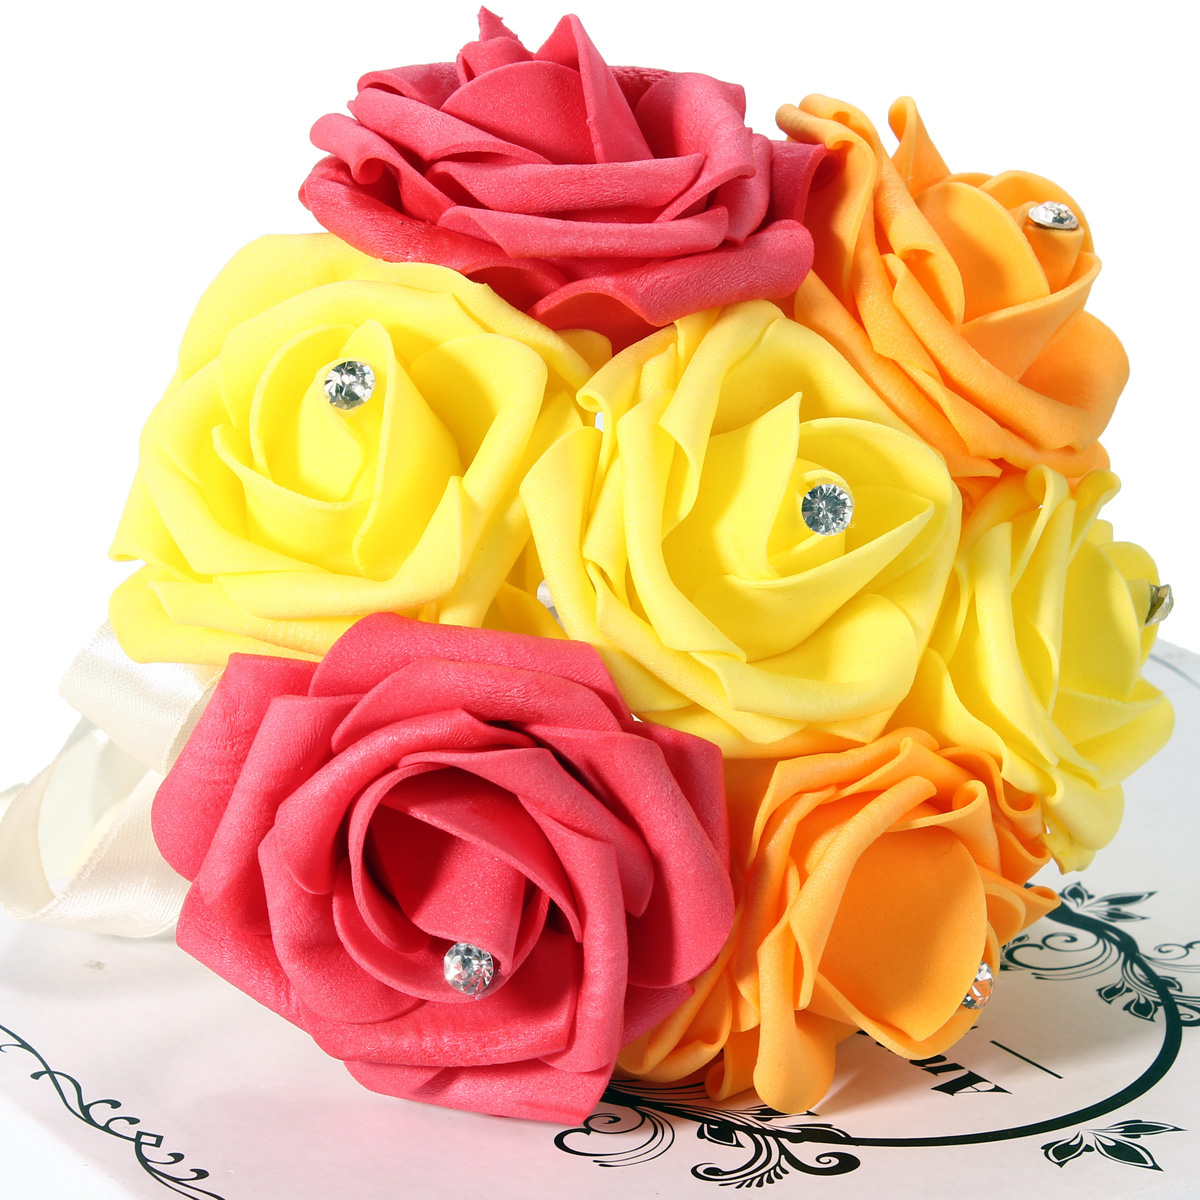 7-Heads-Colourfast-Foam-Roses-Crystal-Artificial-Flower-Home-Wedding-Bride-Bouquet-Party-Decoration-1026818